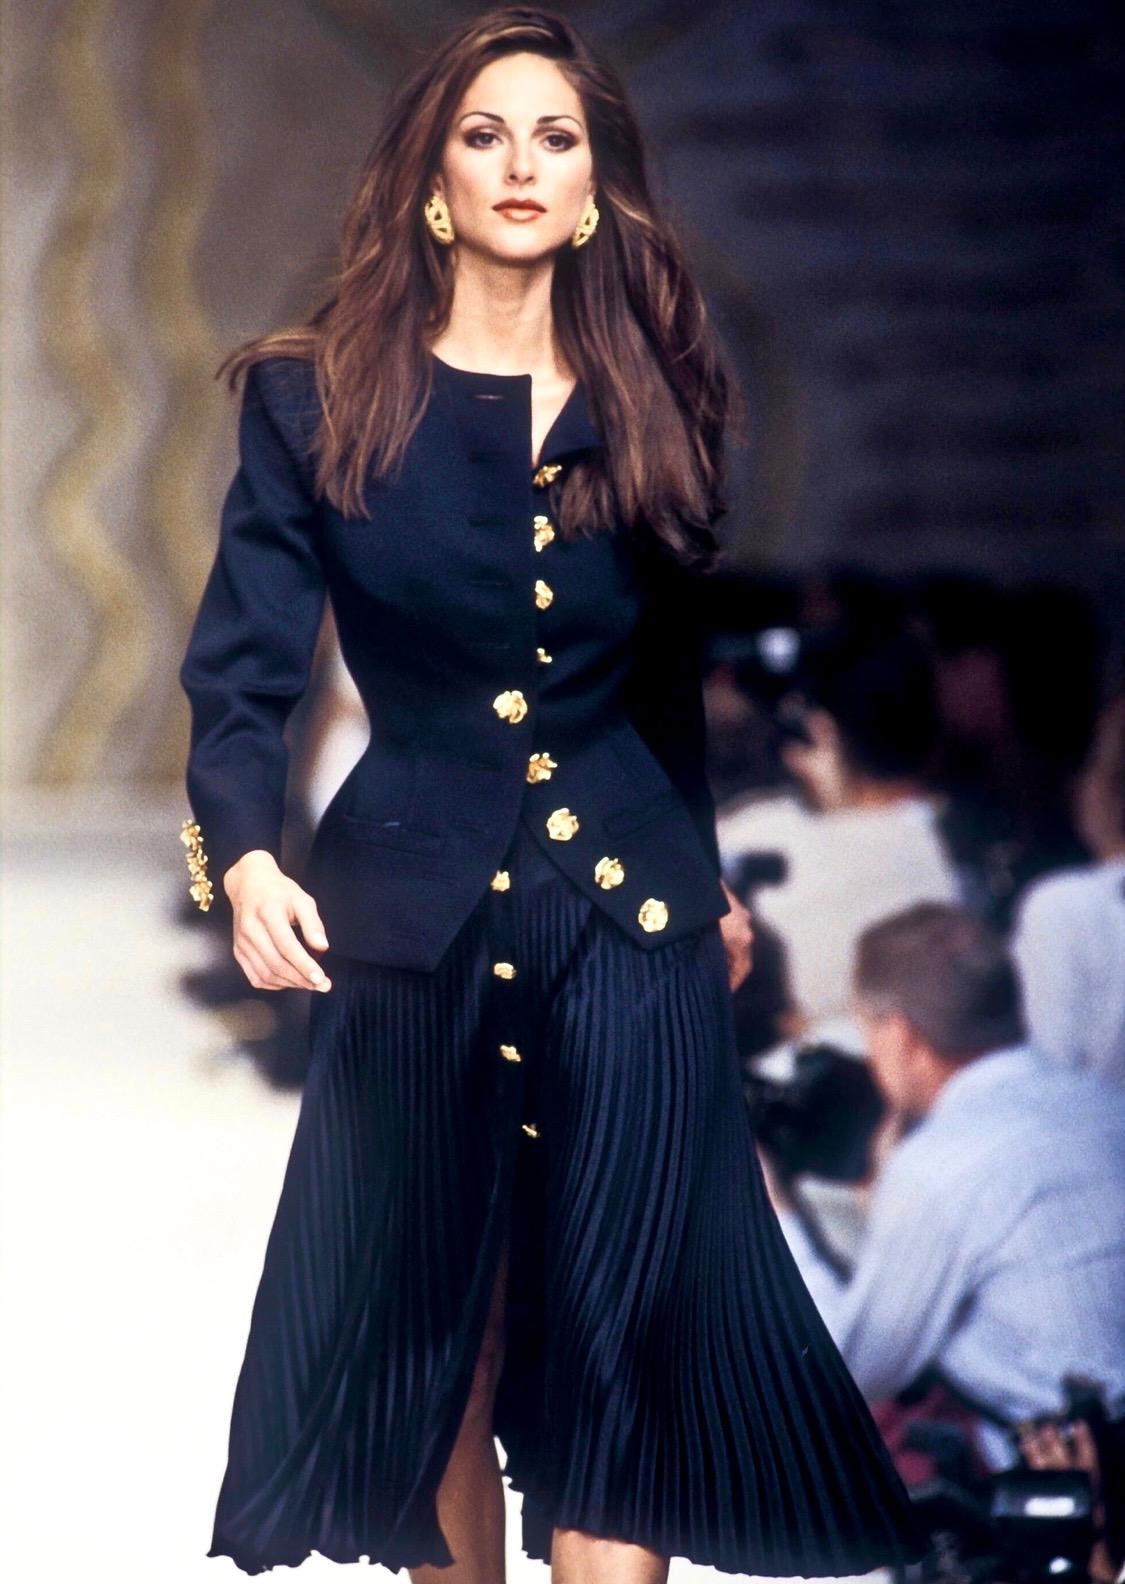 TheRealList presents: a stunning navy Valentino Boutique blazer. From the Spring/Summer 1993 collection, this blazer debuted on the season's runway modeled by Tasha de Vasconcelos. This fabulous jacket features sculptural gold-tone rose buttons at